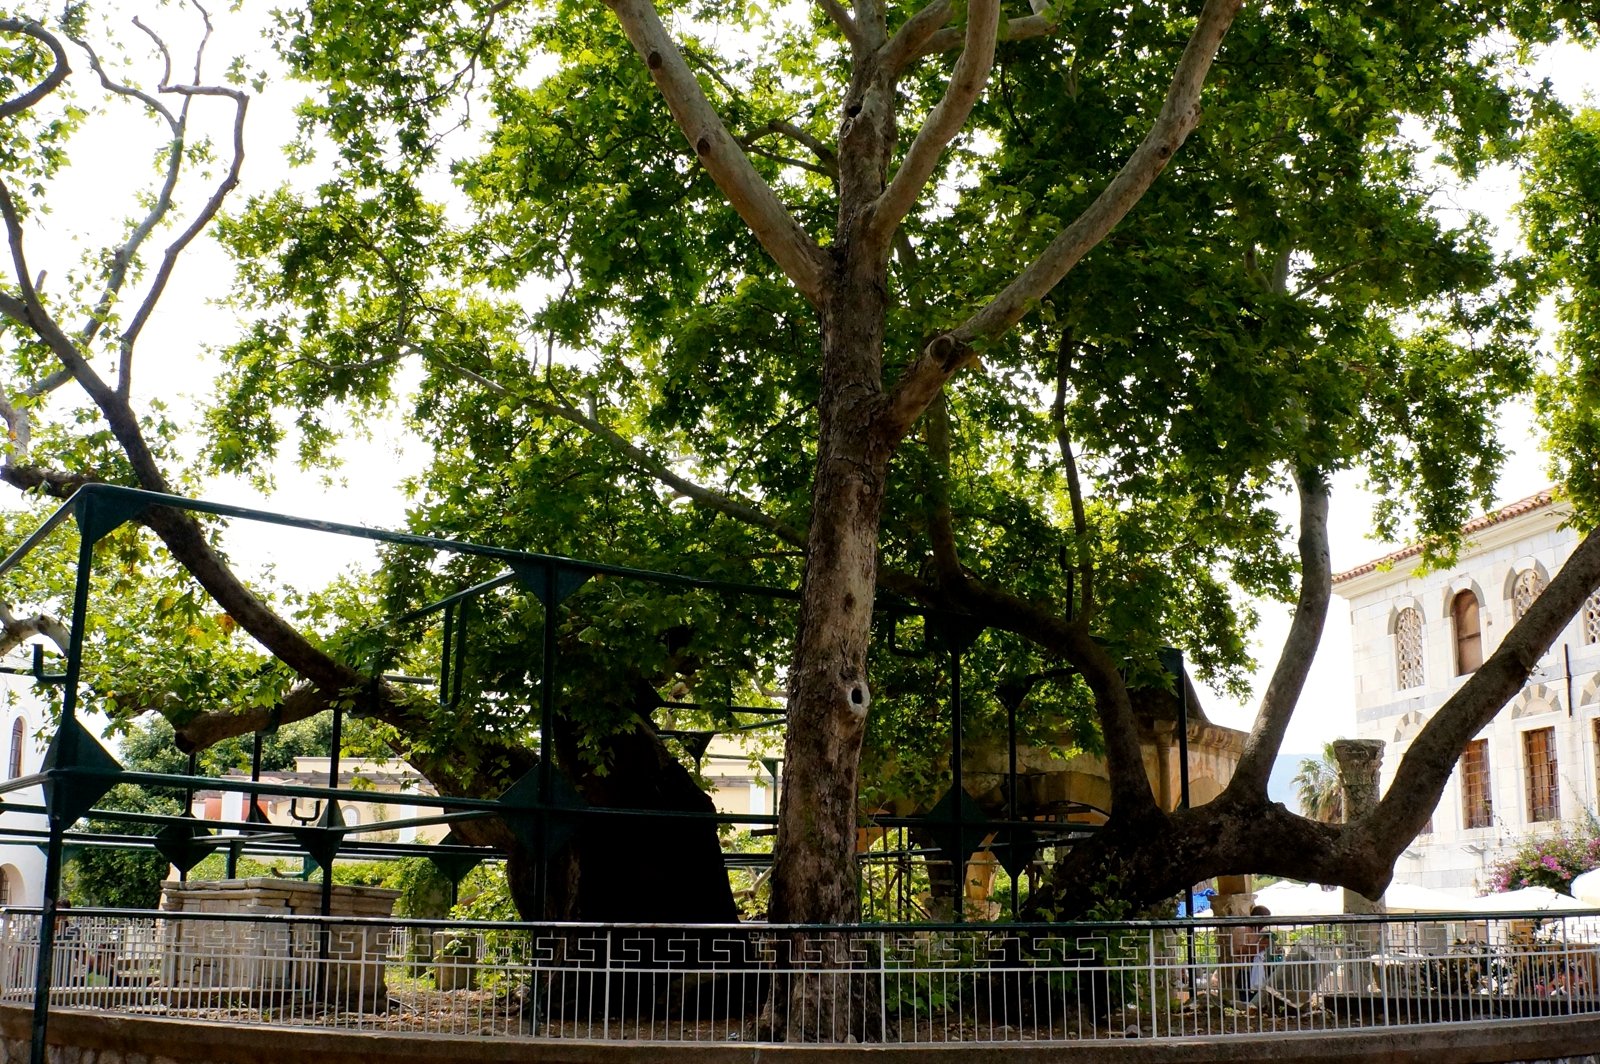 How to seat ander the legendary Tree of Hippocrates on Kos